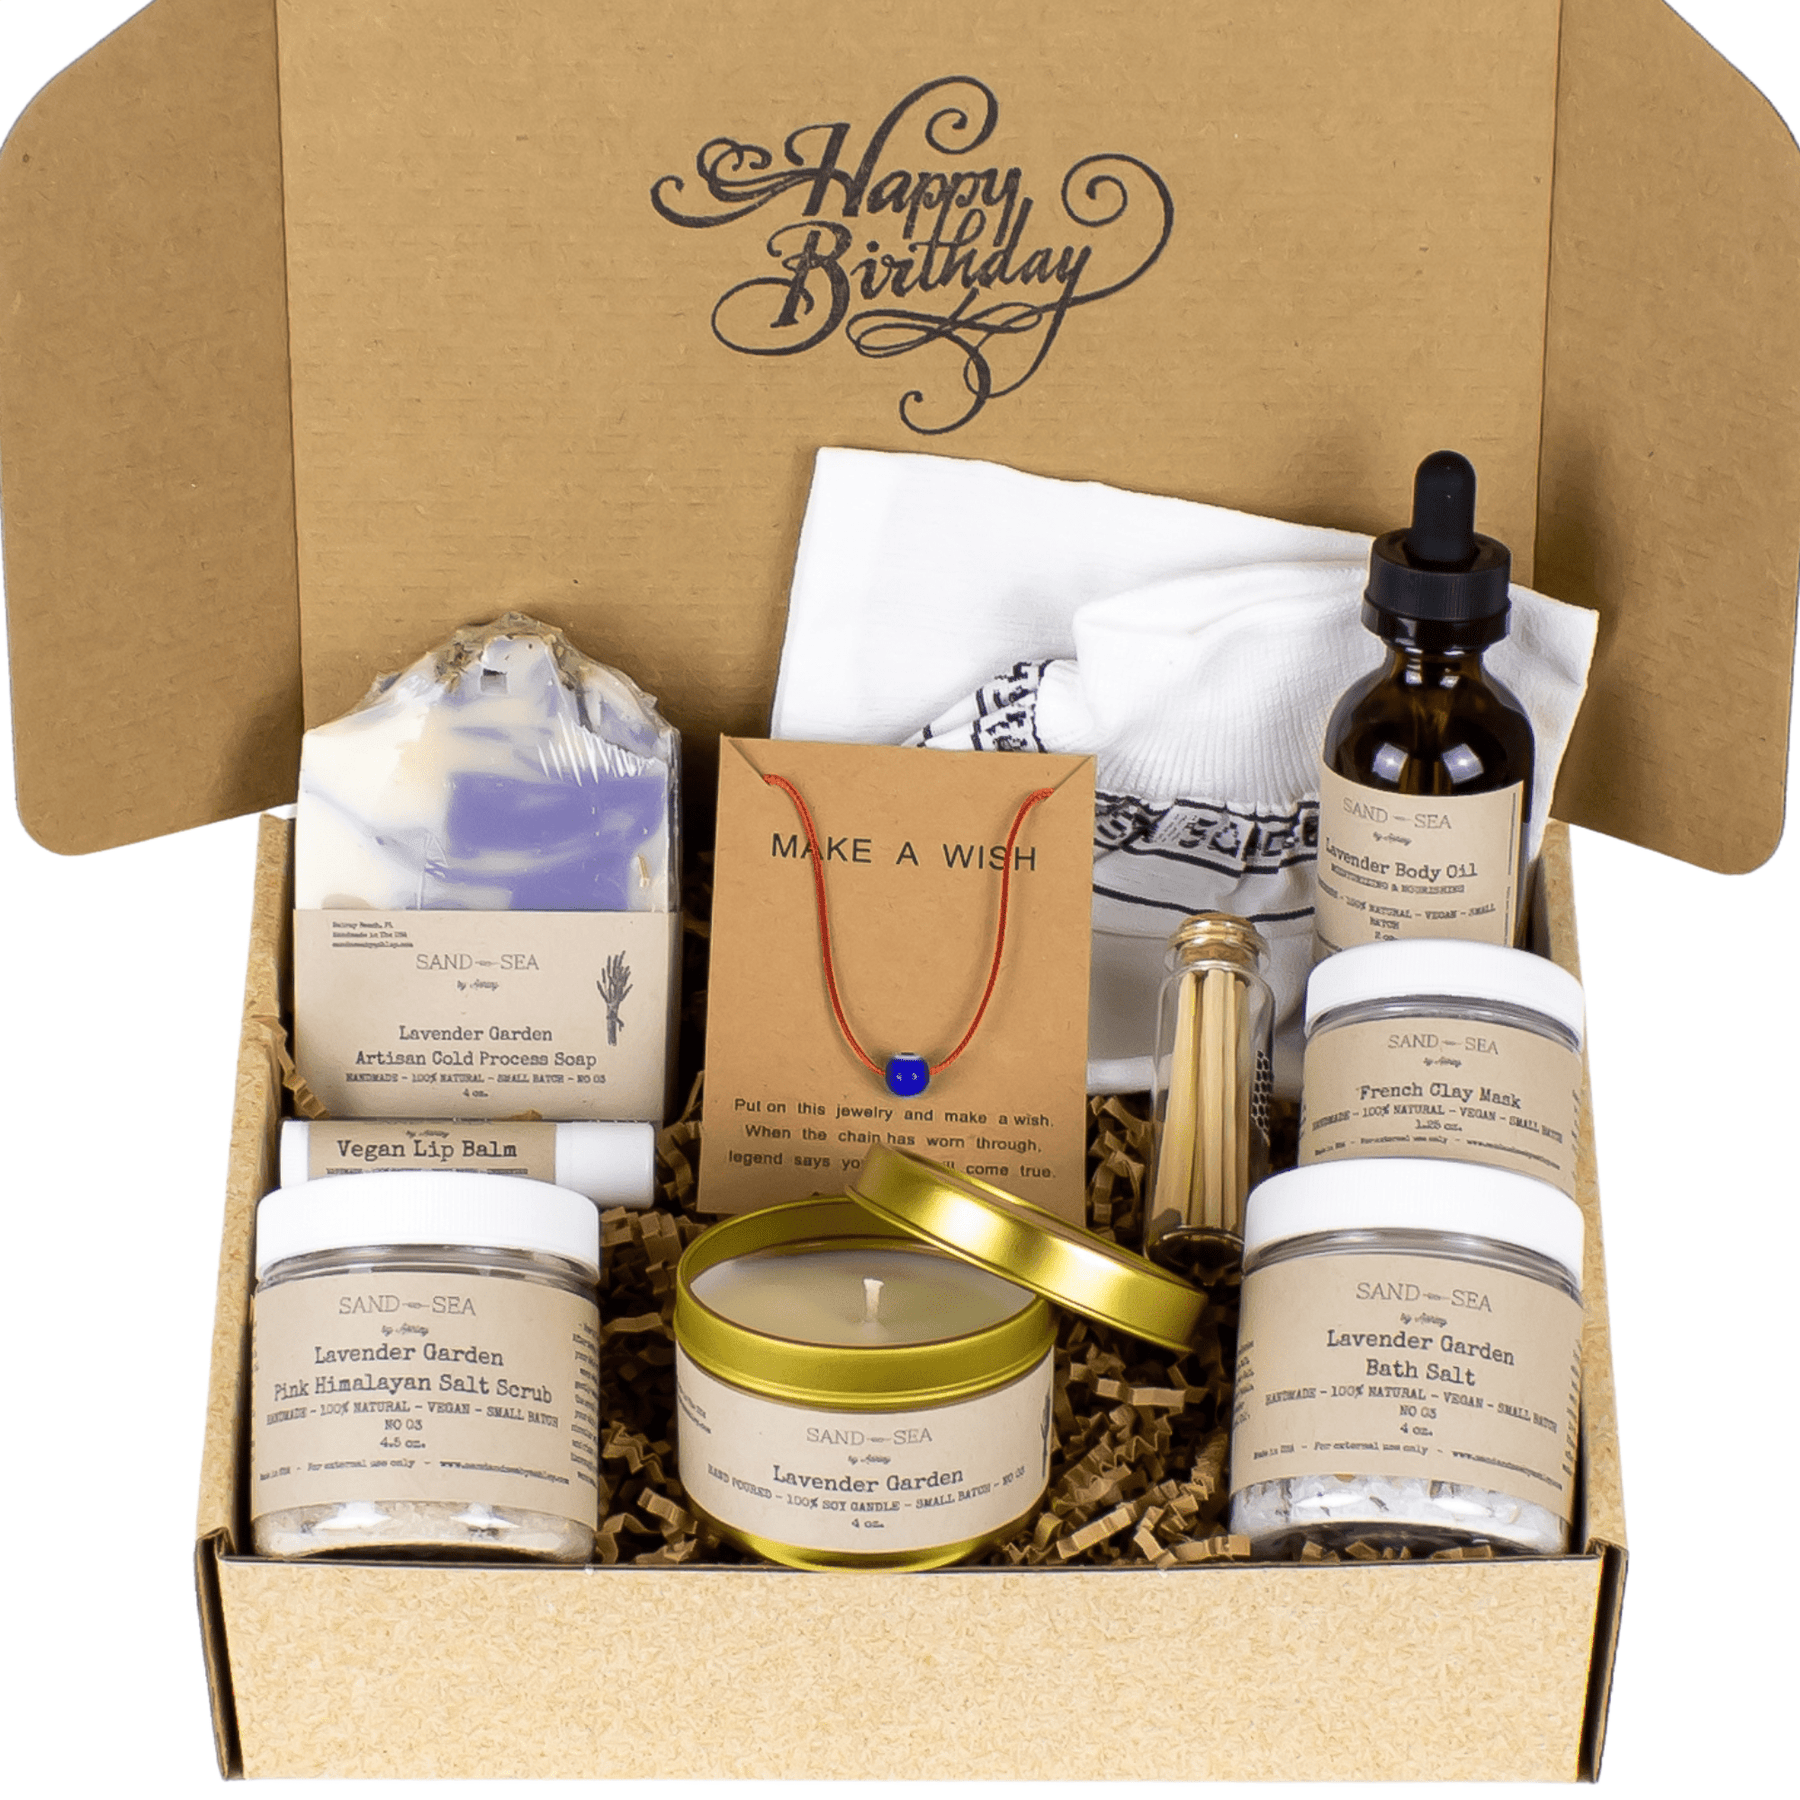 Spa Gift Basket - Luxury, Organic and Natural - Self Care Kit to Pamper Women, Mom, Sister, Friend - Birthday Gifts - Pink - High End, Deluxe Baskets